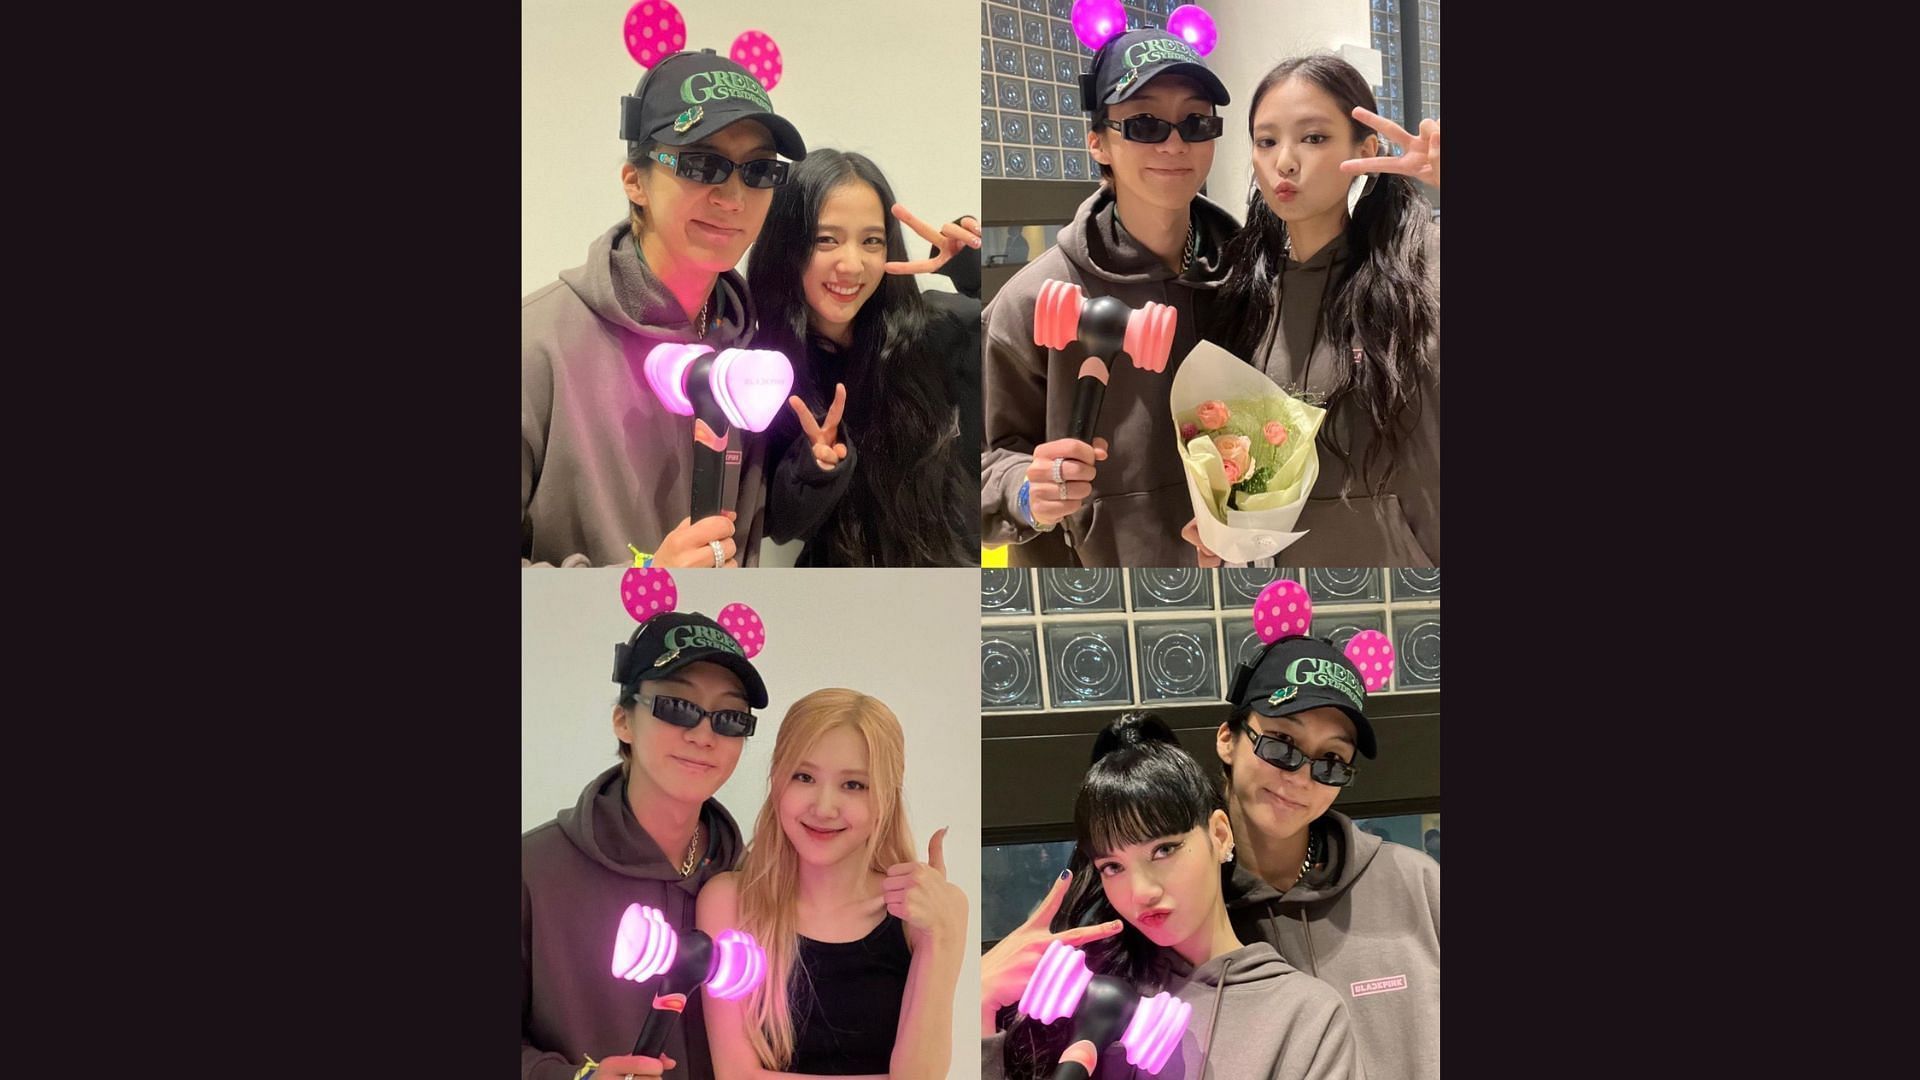 WINNER member Seunghoon clicked a picture with all four members of BLACKPINK at their concert (Images via Instagram/maetamong)